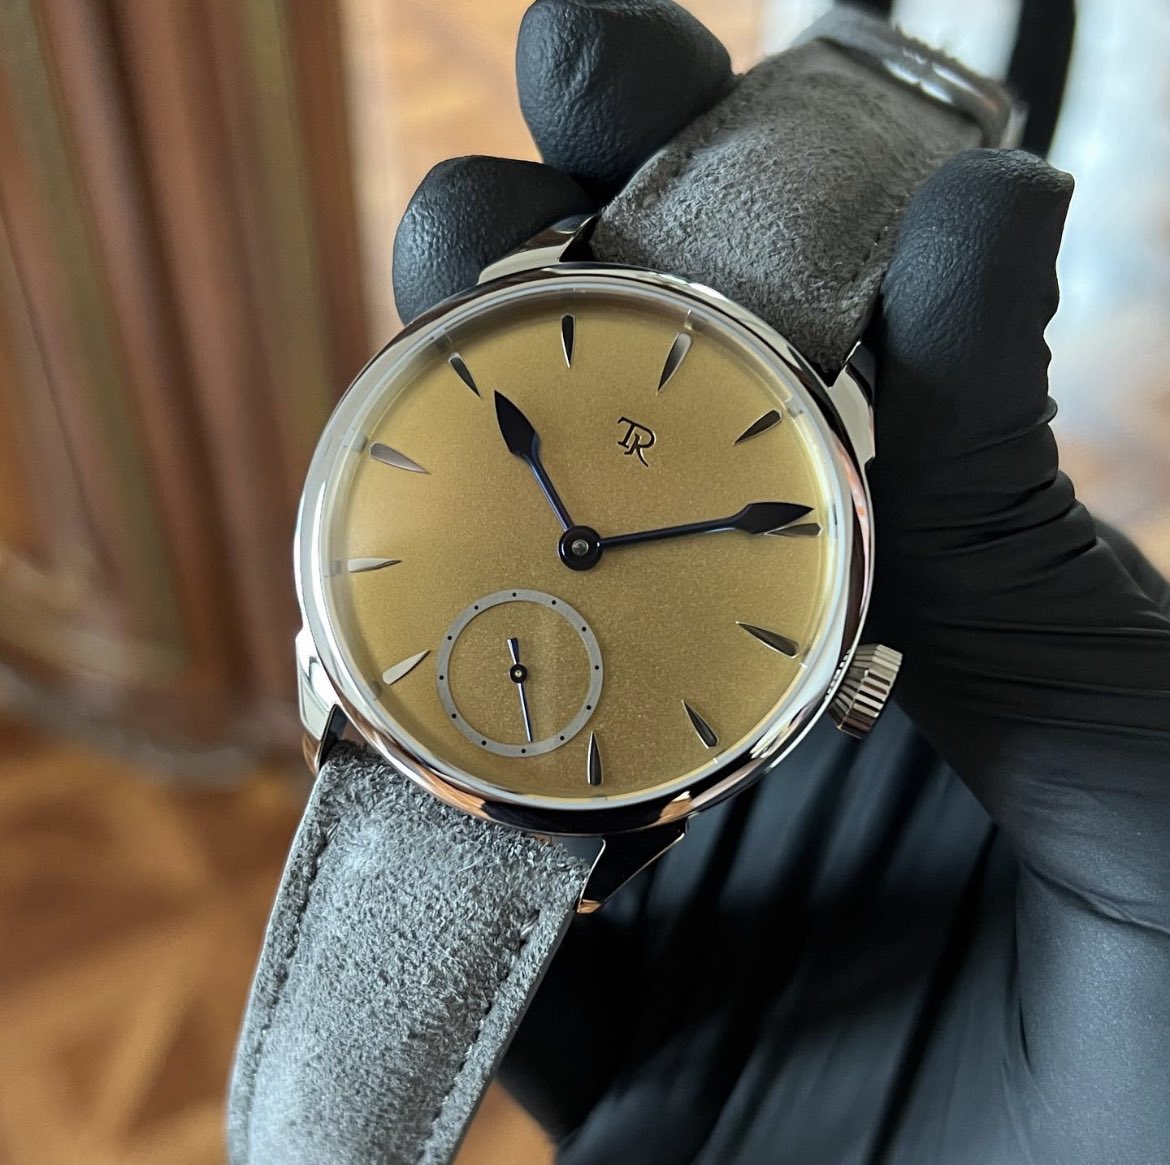 Arrow with yellow gold dial and blued hands made as unique piece. 

#arrowcollection #watch #hautehorlogerie #horlogerie  #exclusive #handcraft #production #classic
#uhren #montre #reloj #stainlesssteel
#independentwatchmaking #horology
#handmadewatch #watchfam #instawatch